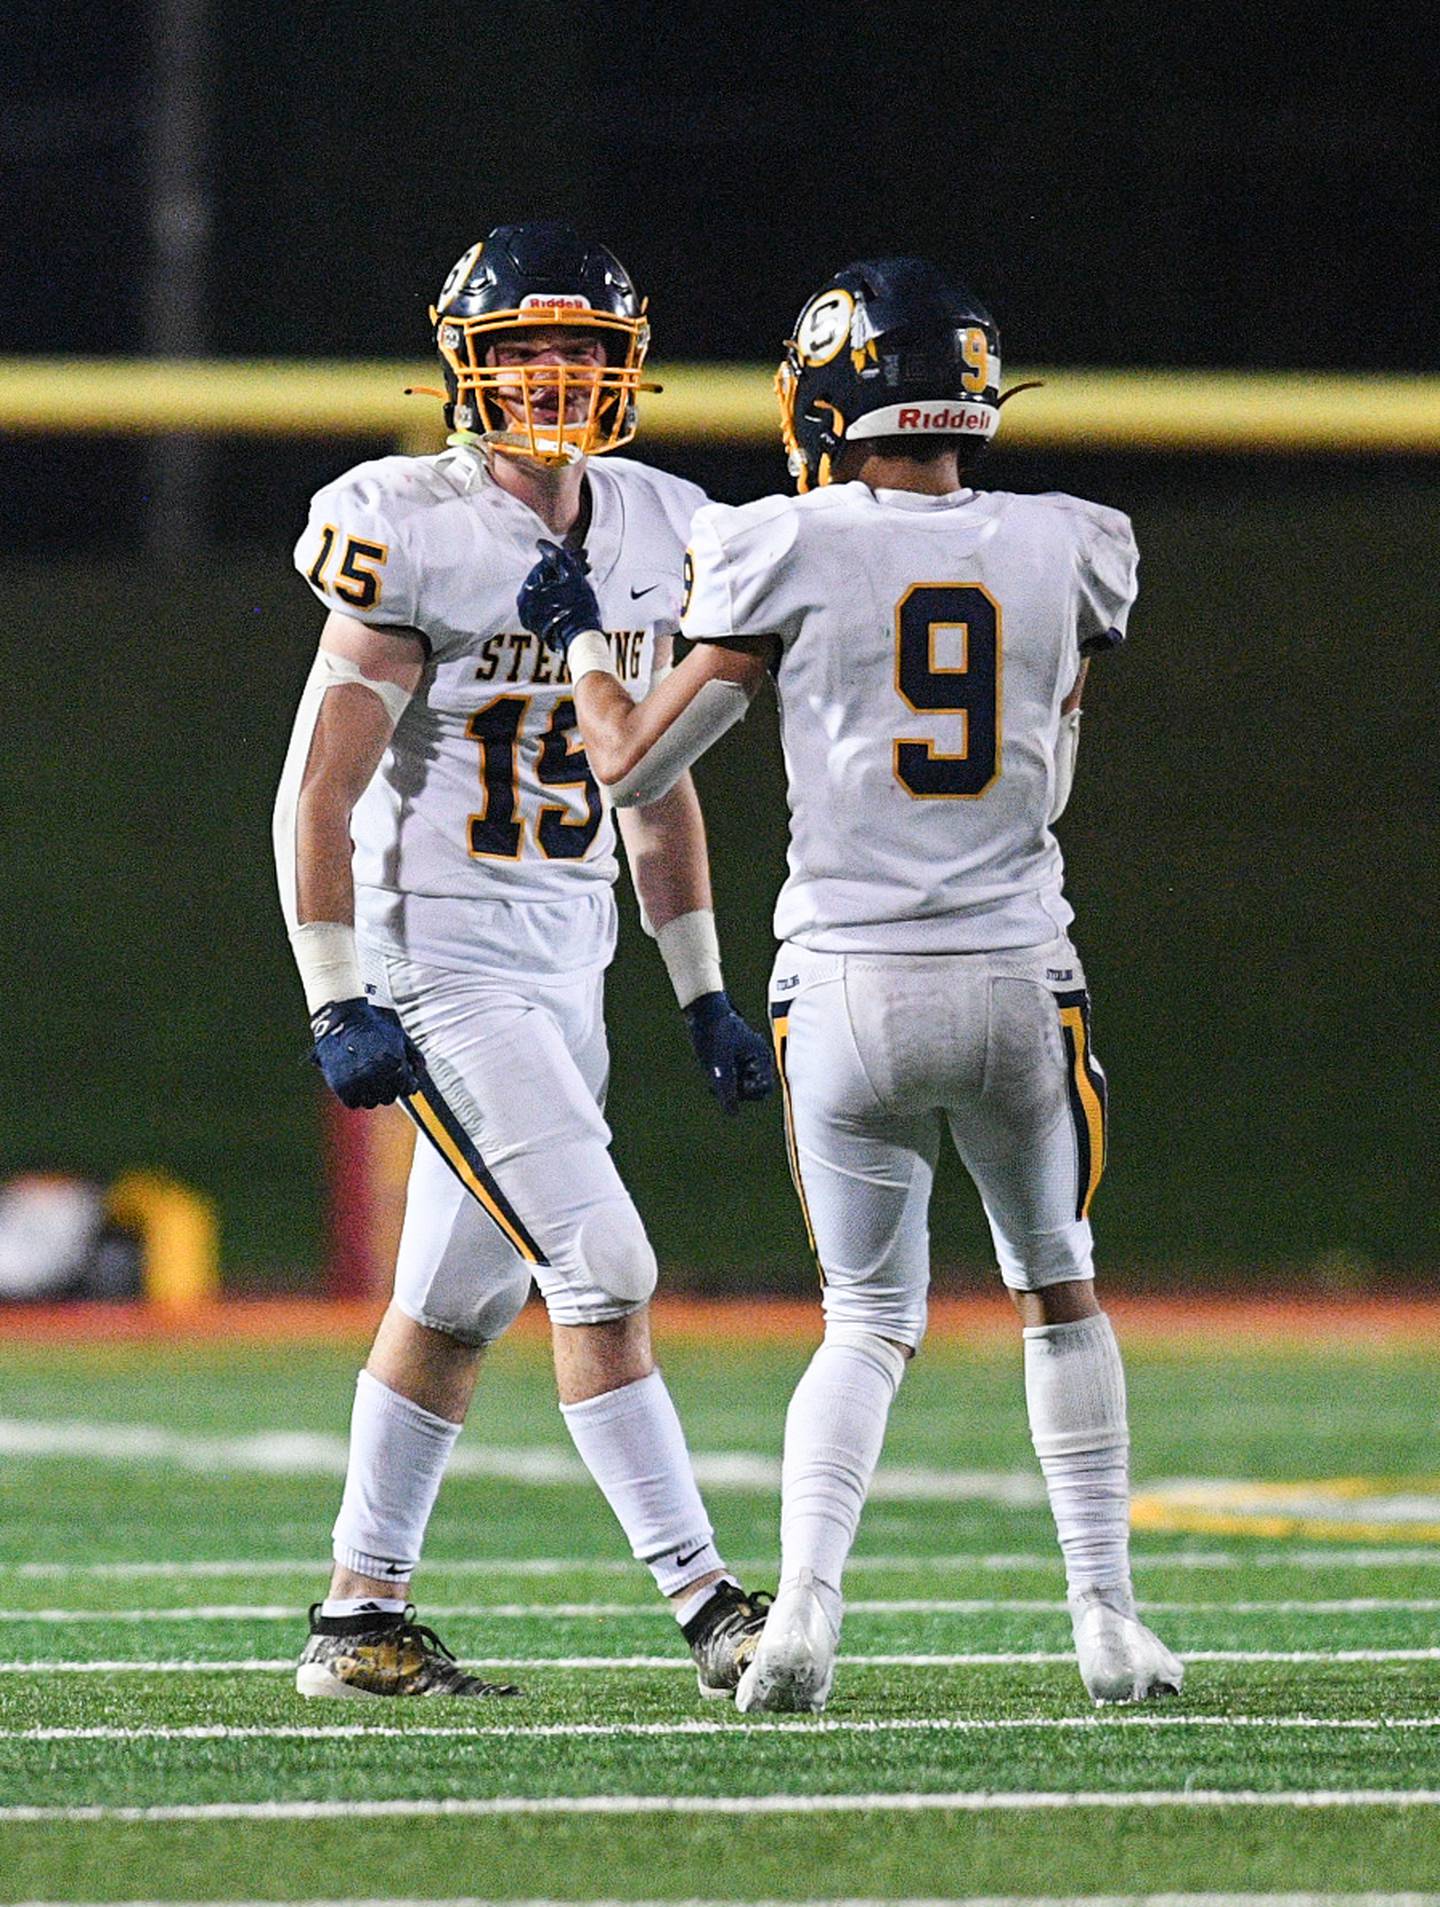 Sterling's Carter Ryan (15) and AJ Kested (9) celebrate during their game against Rock Island at Almquist Field Friday, Oct. 8, 2021, in Rock Island.